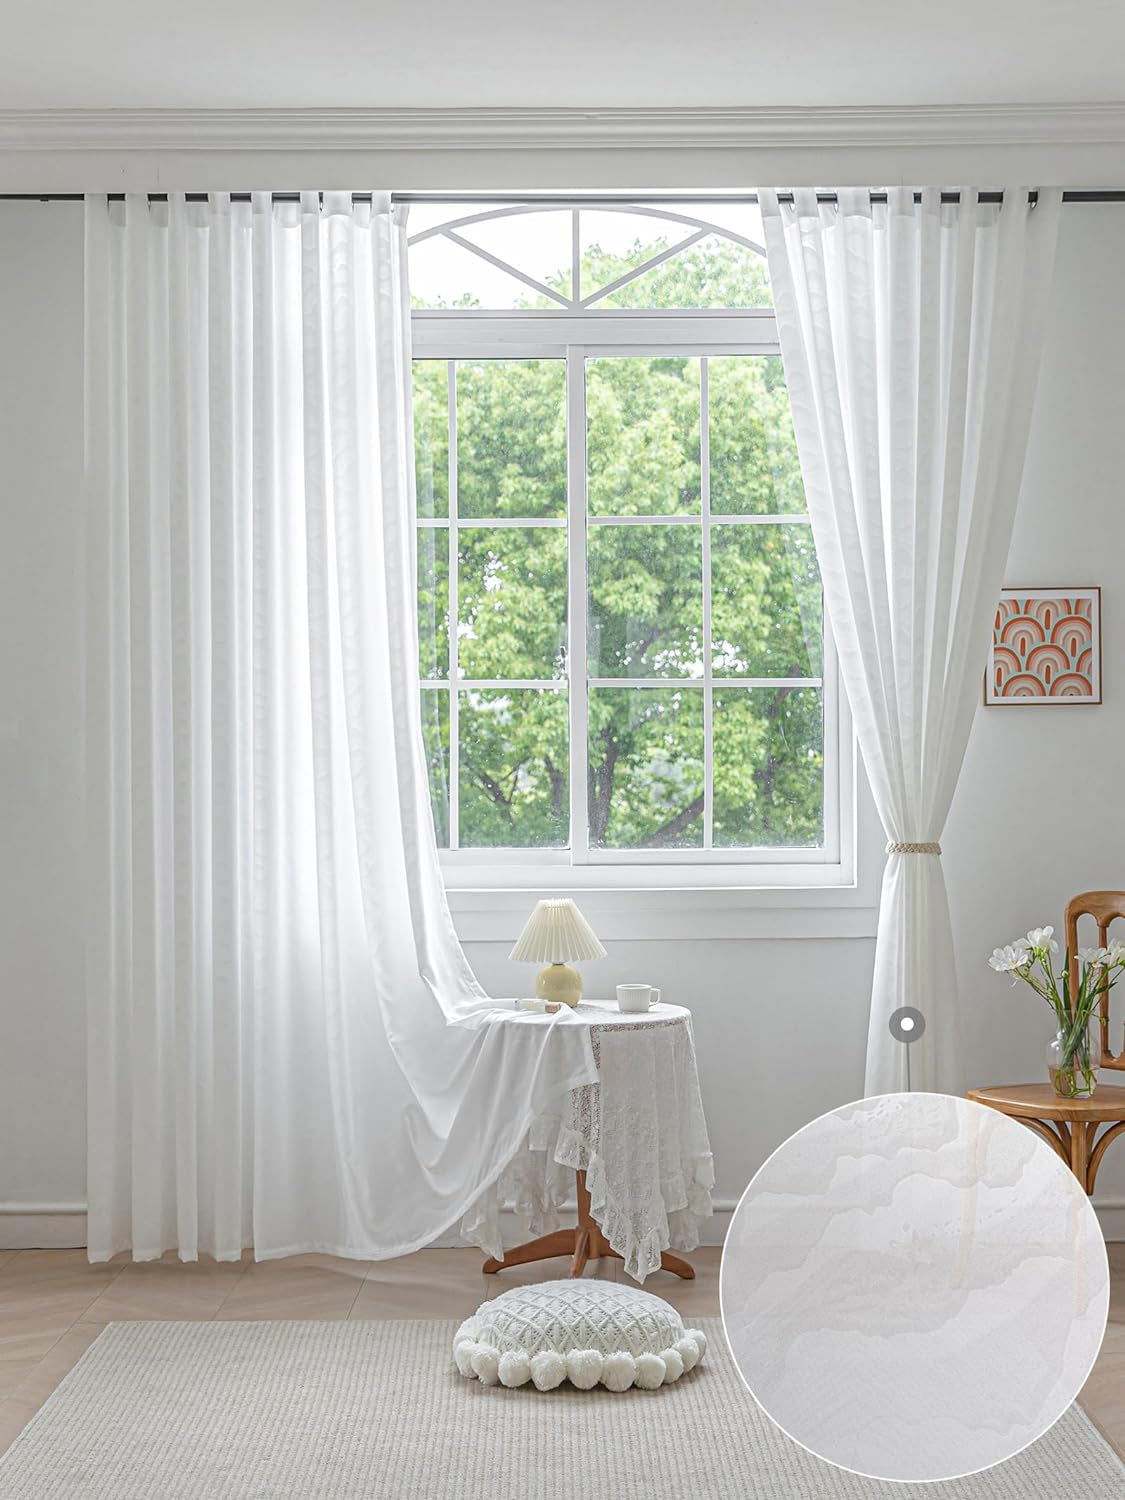 Avigers White Cloud Pattern Sheer Curtains for Living Room 84 Inch Length 2 Panels Set, Grommet Top Semitransparent Balance Privacy & Light Vertical Sheer Drapes for Bedroom, W52 X L84